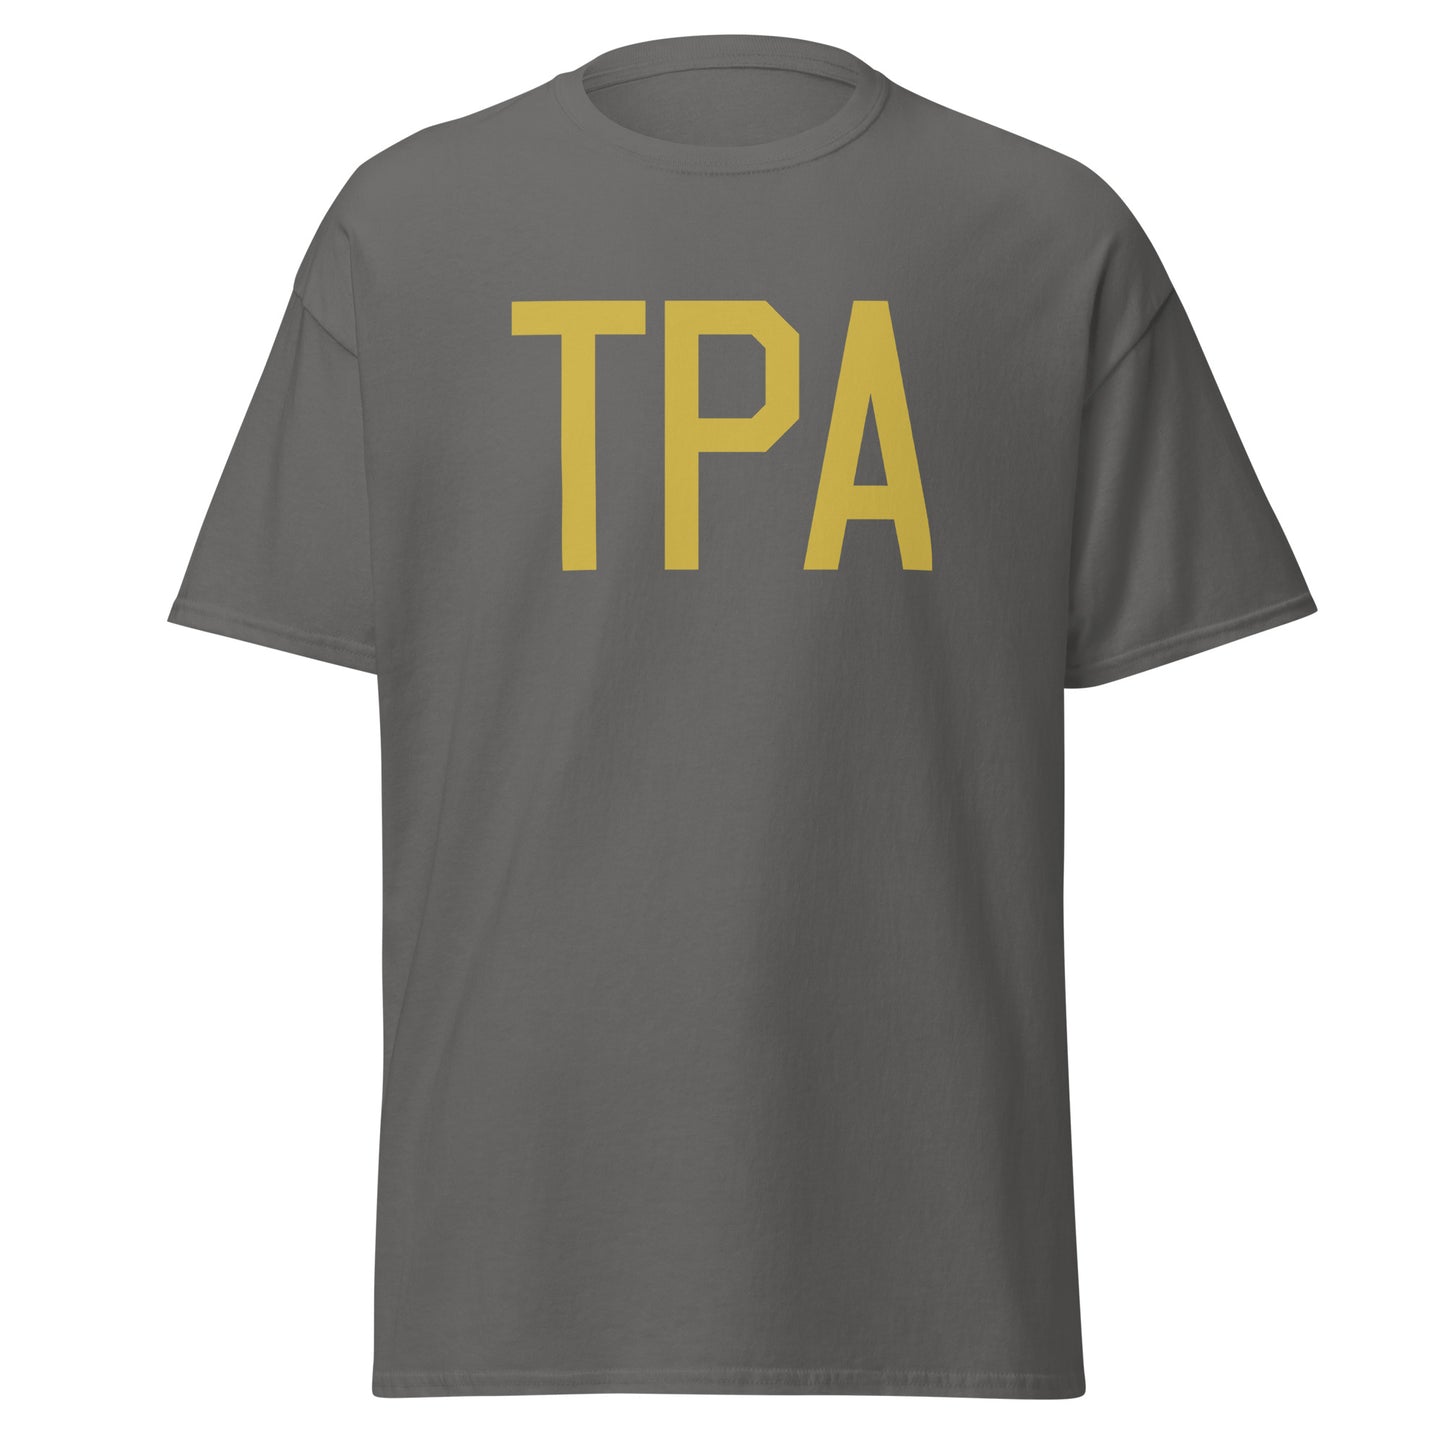 Aviation Enthusiast Men's Tee - Old Gold Graphic • TPA Tampa • YHM Designs - Image 05